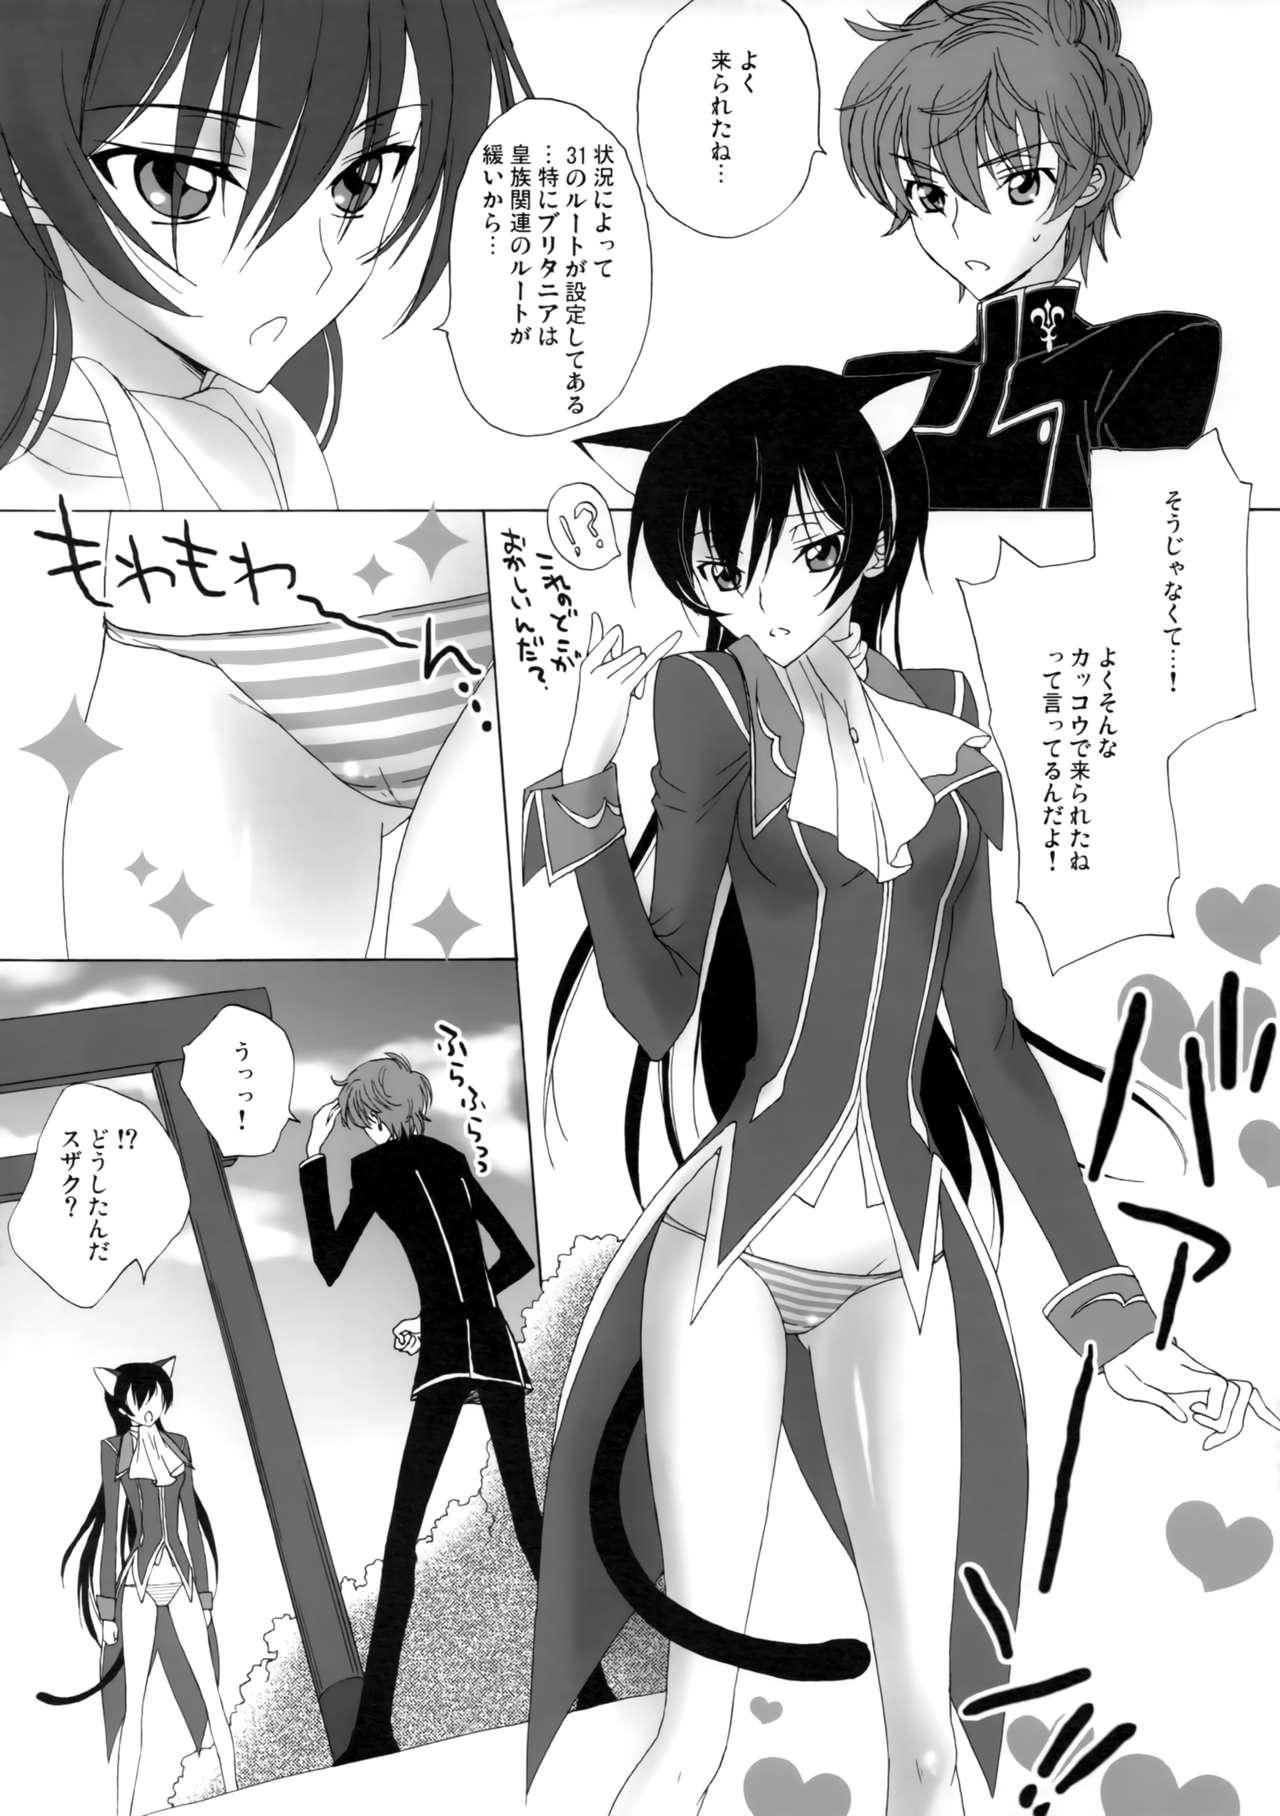 Forbidden Strawberry Nyan Day - Code geass Anal Play - Page 4